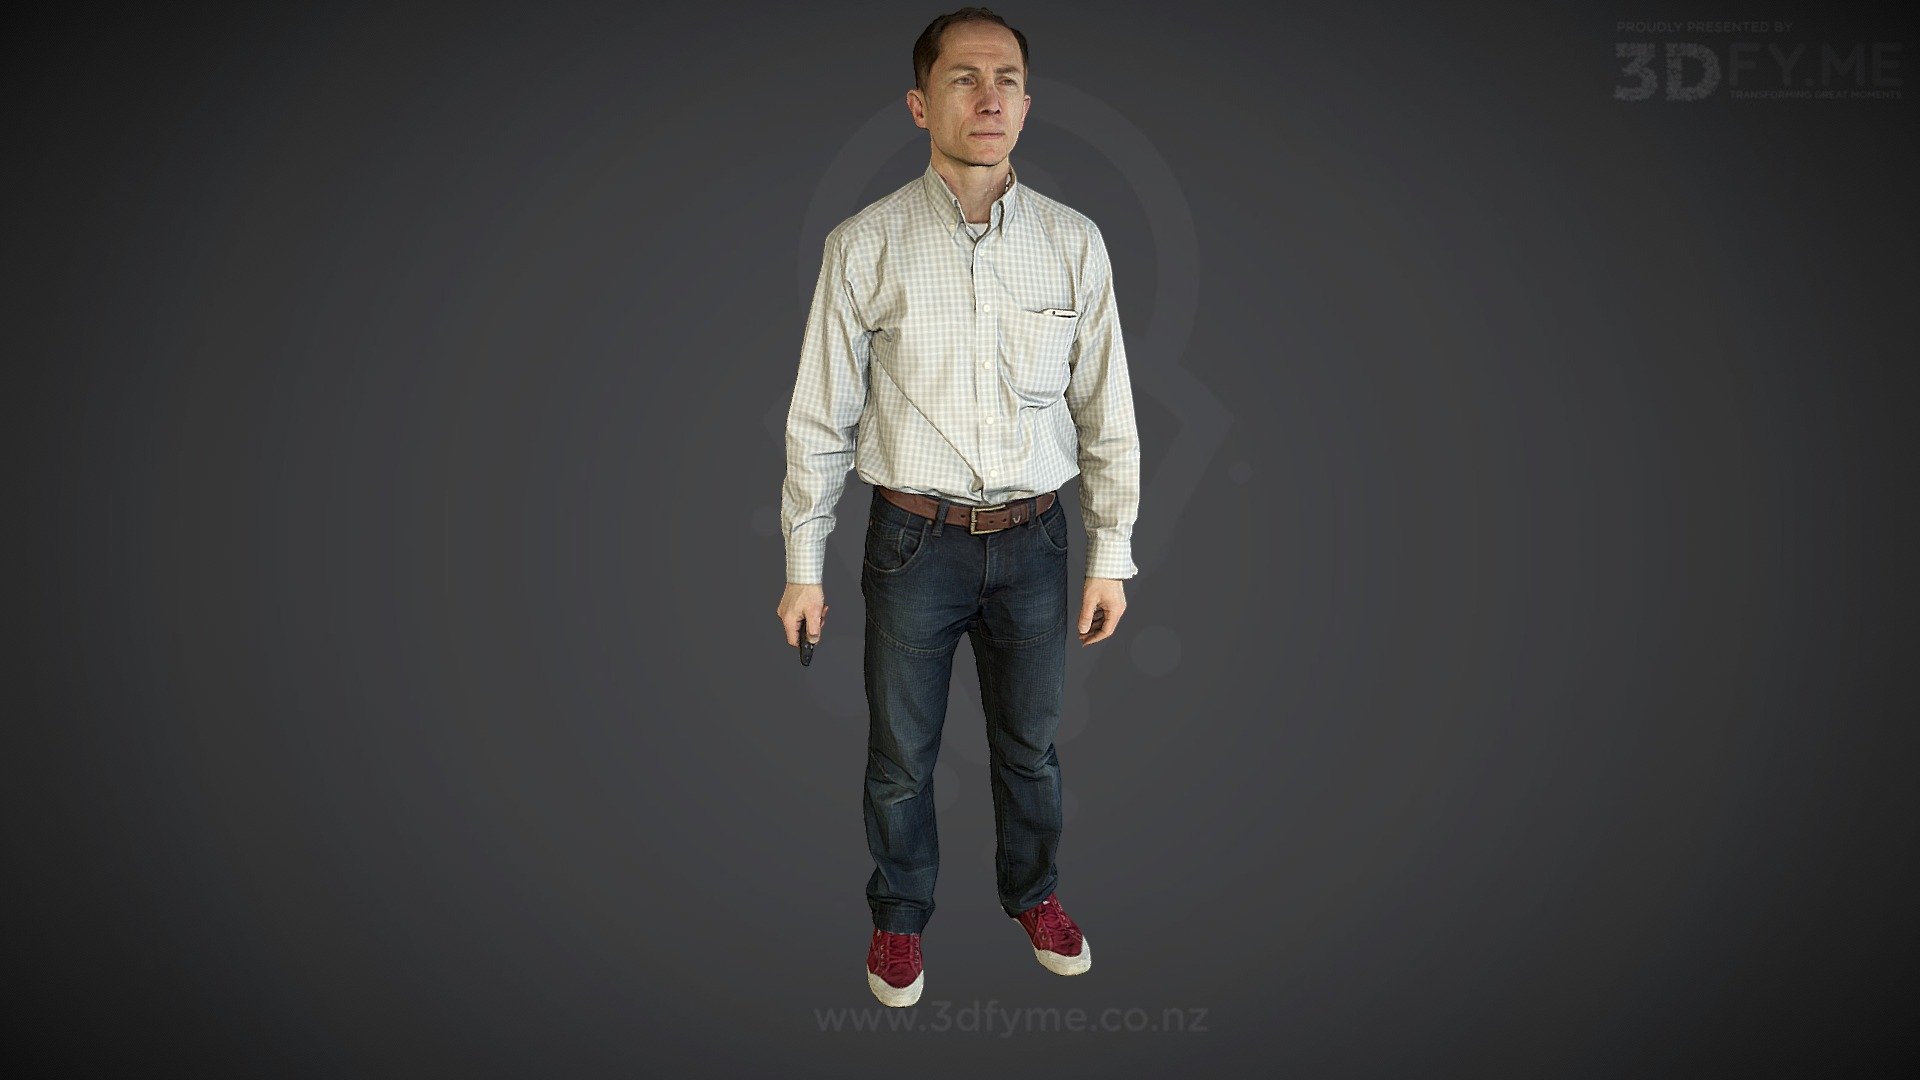 608_Full-body Photogrammetry Scan (no cleanup) - 3D model by 3Dfy.me New Zealand (@smacher2016) 3d model